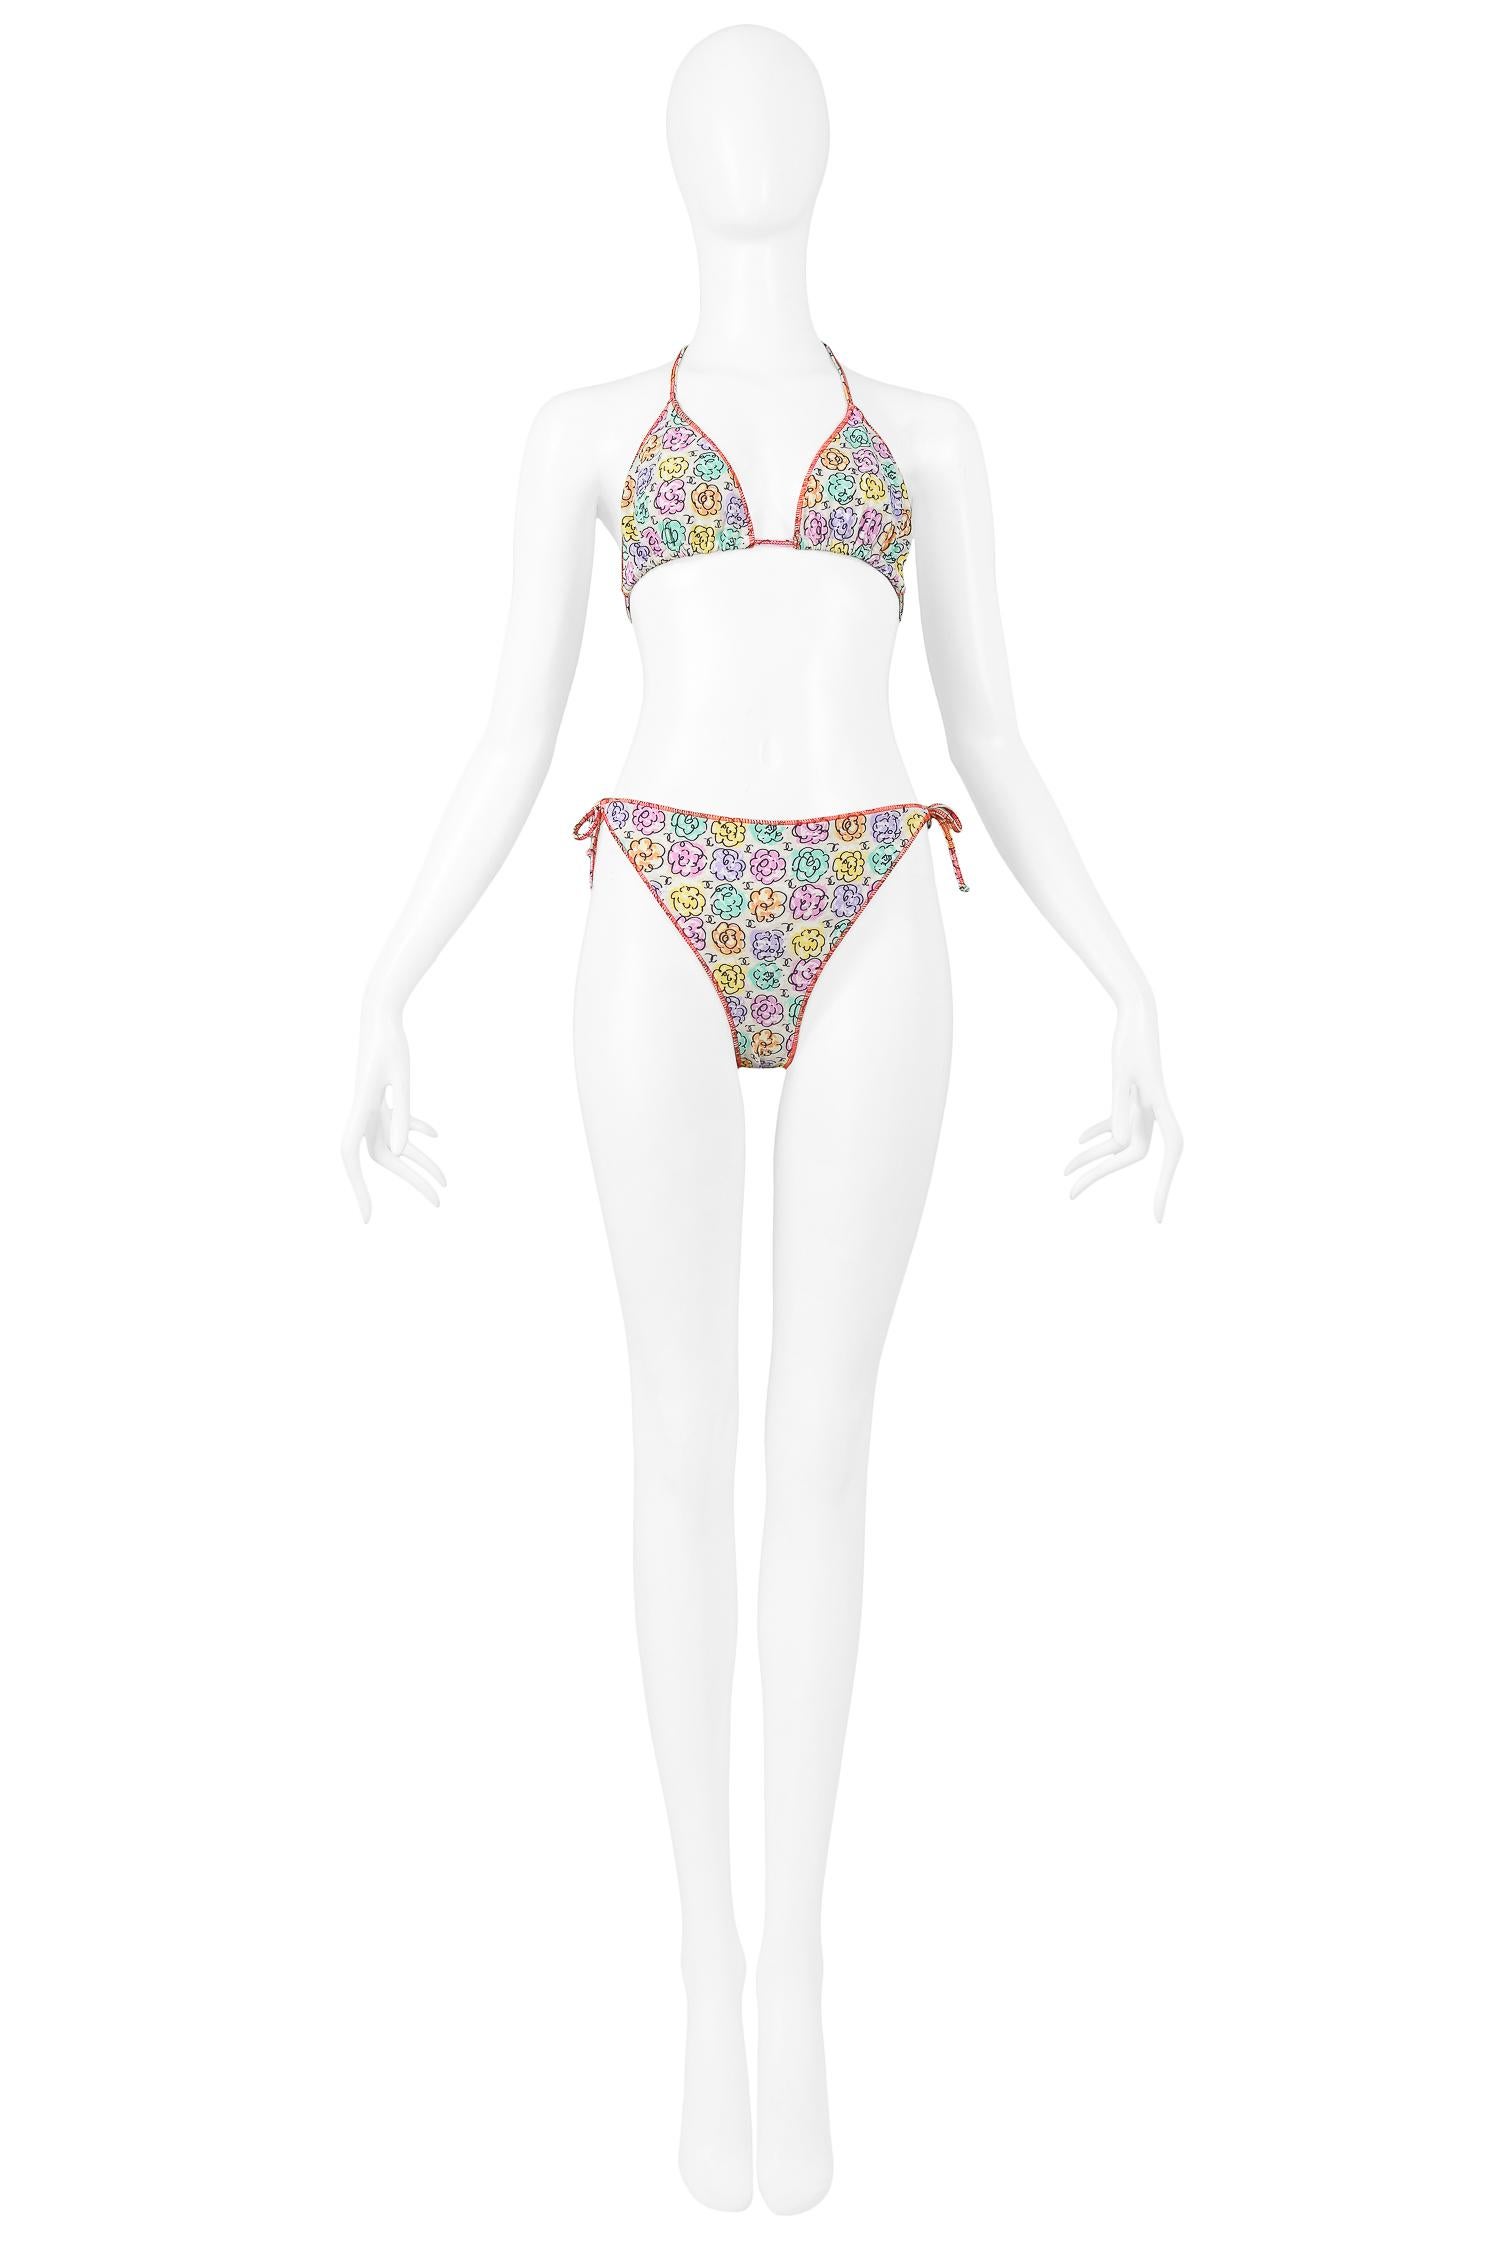 Vintage Chanel multicolor floral printed tie string bikini featuring exposed pop color stitch detail. 

Excellent Vintage Condition.

No Size Label. 
Would likely fit a size 38-40. Please inquire for measurements.